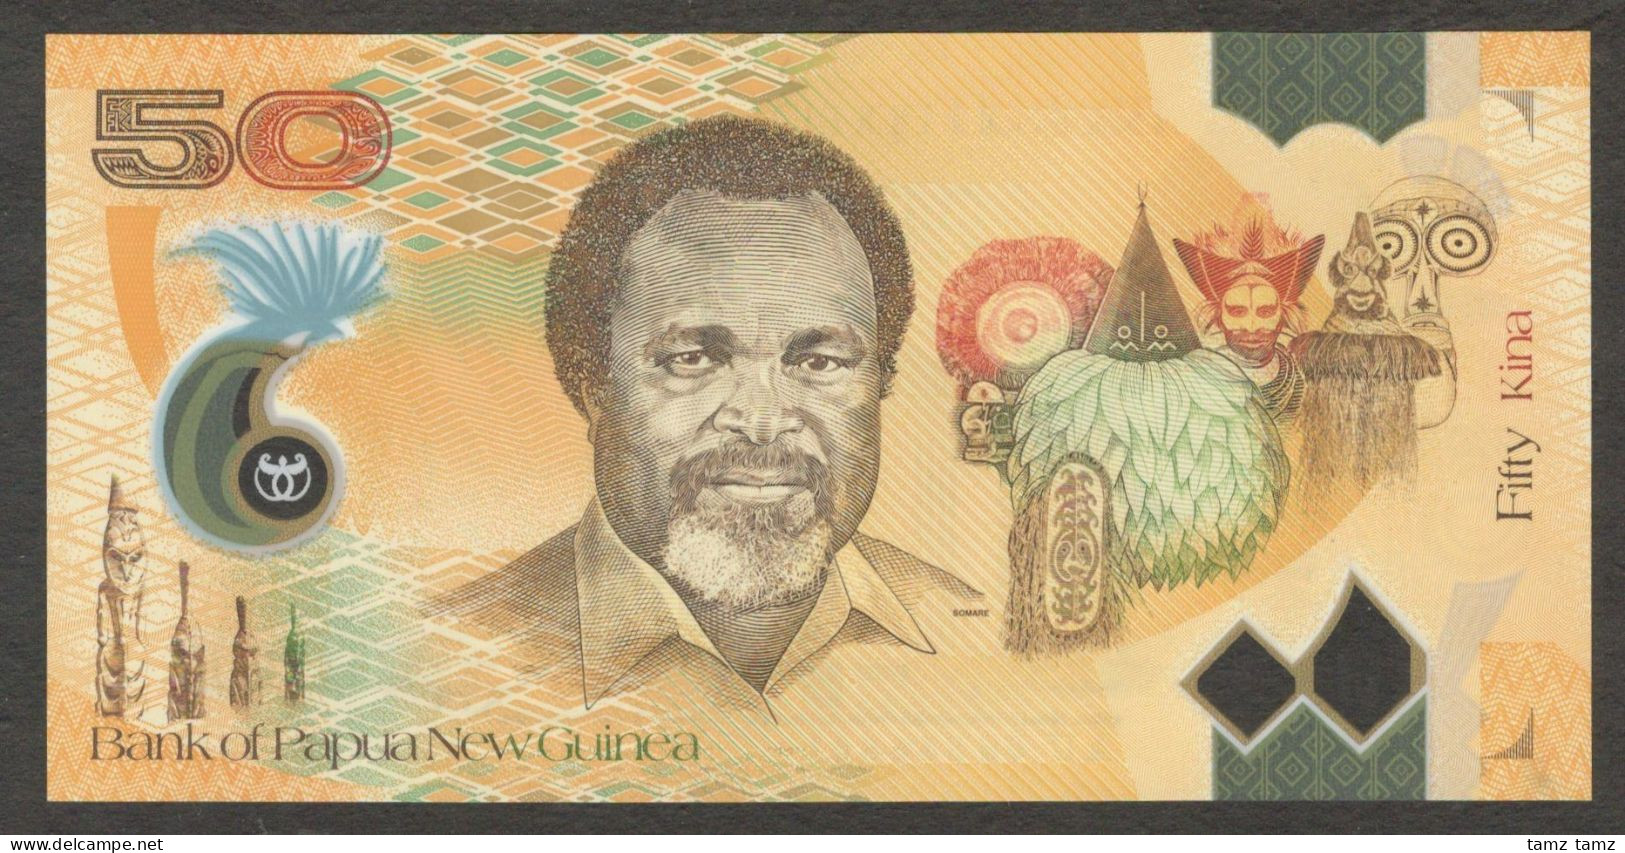 Papua New Guinea 50 Kina 2008 Polymer UNC Beautiful Banknotes - Papouasie-Nouvelle-Guinée